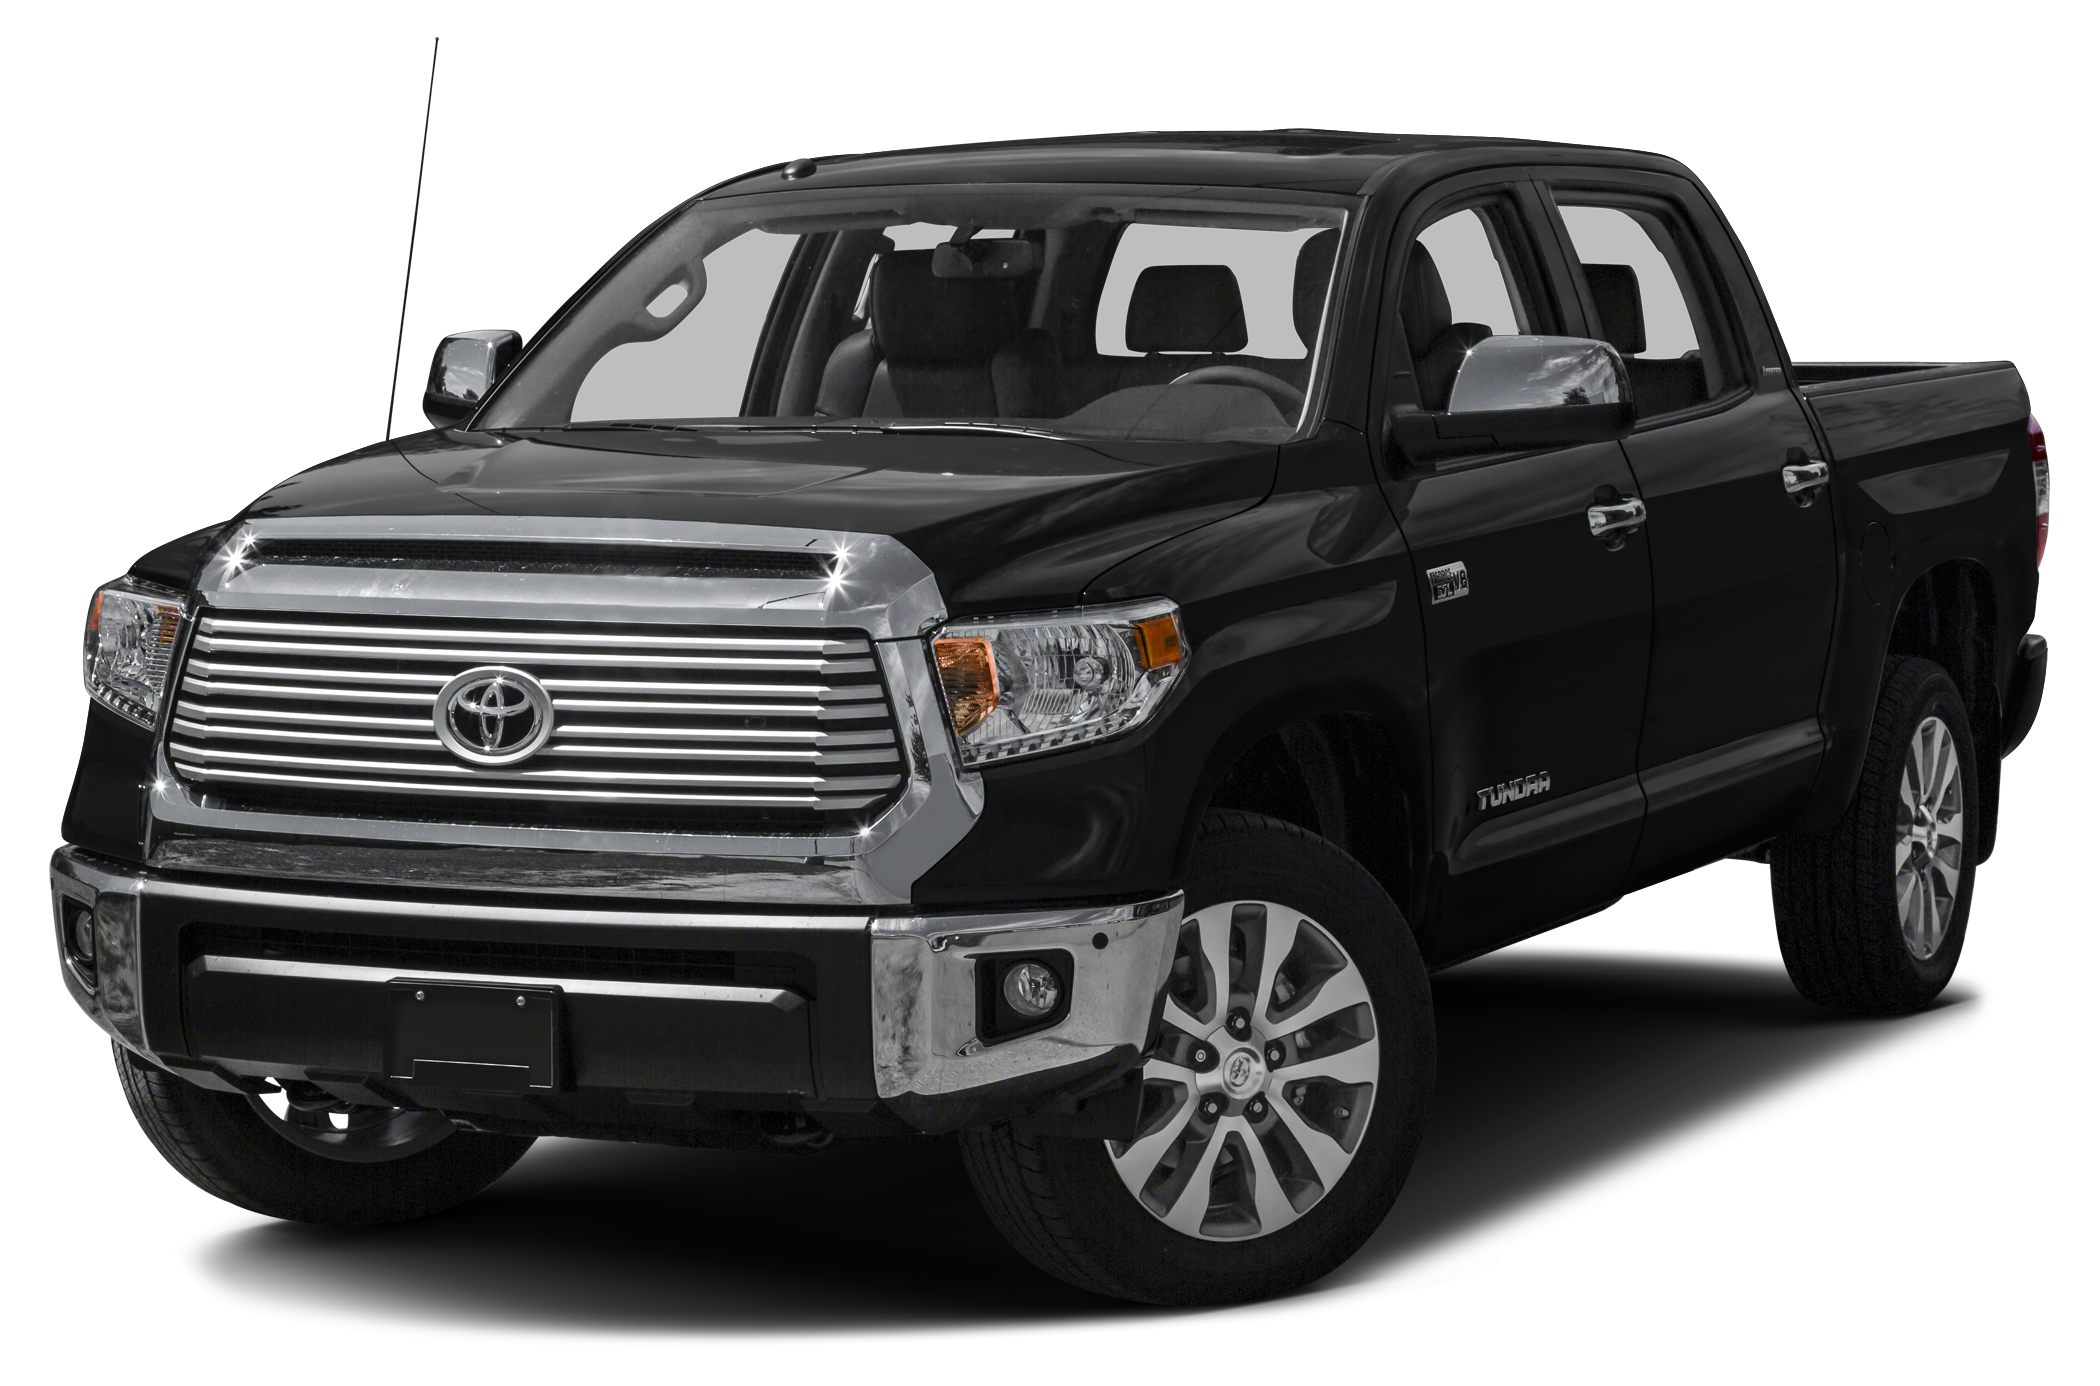 2015 Toyota Tundra Limited 5 7l V8 4x4 Crewmax 5 6 Ft Box 145 7 In Wb Pictures